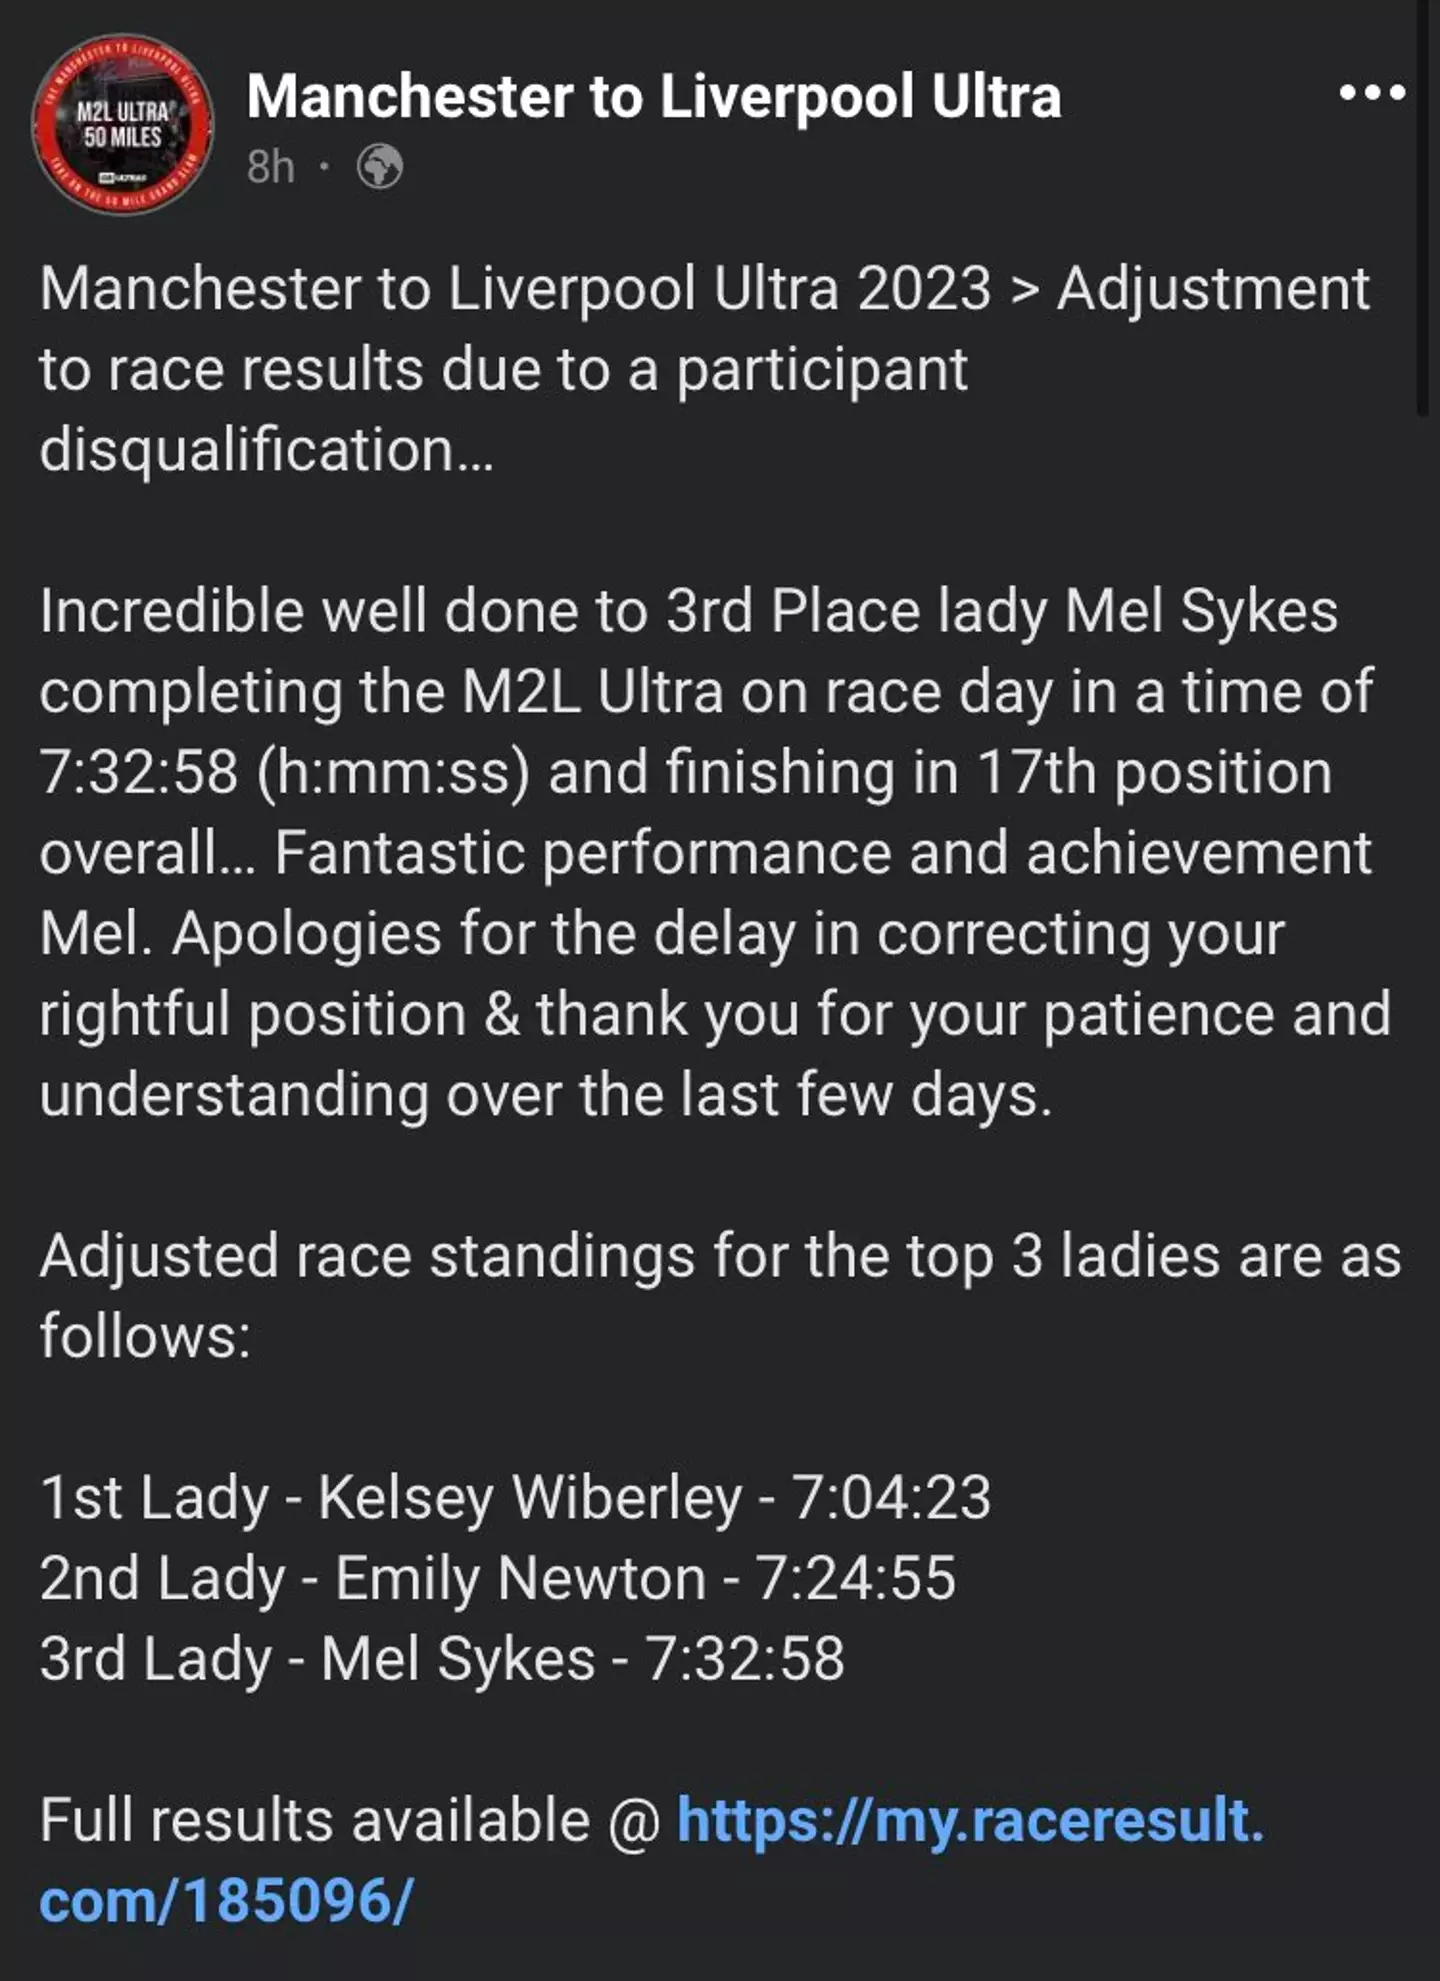 Fellow ultrarunner, Mel Sykes, shared the updated race results to Twitter.